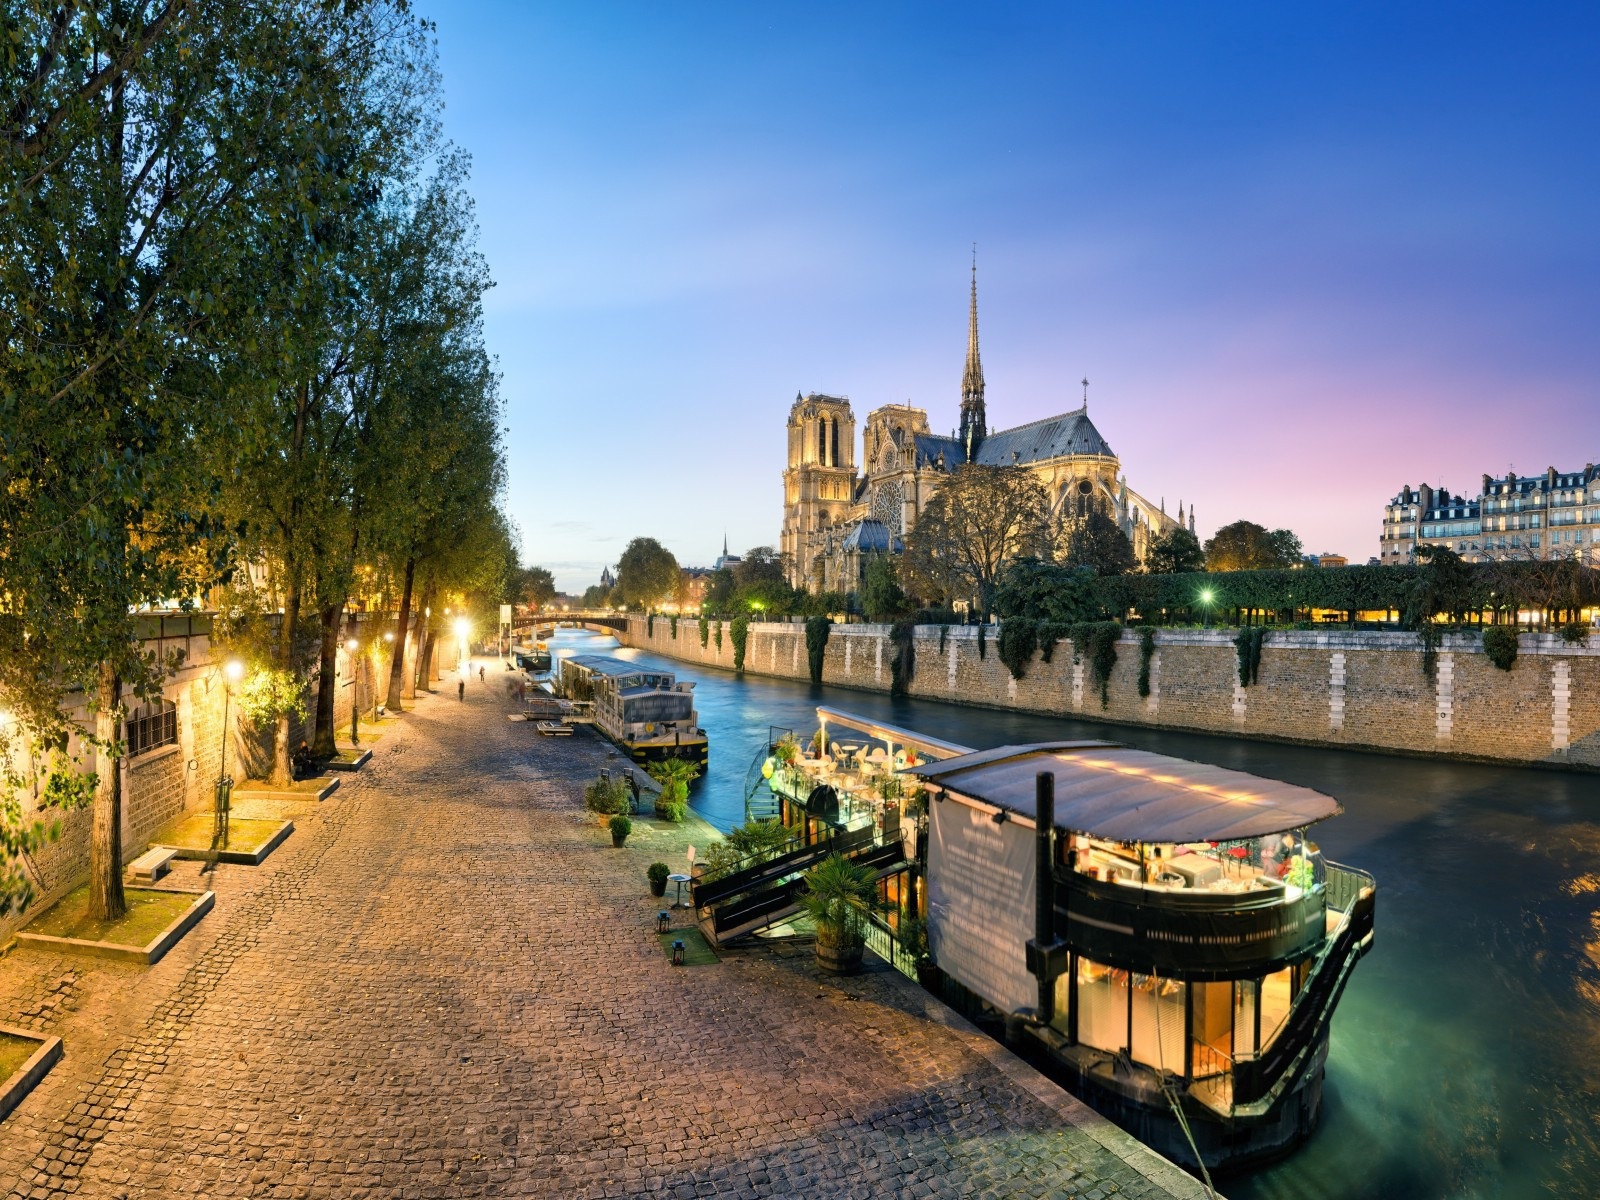 Notre Dame HD Wallpapers #3 - 1600x1200